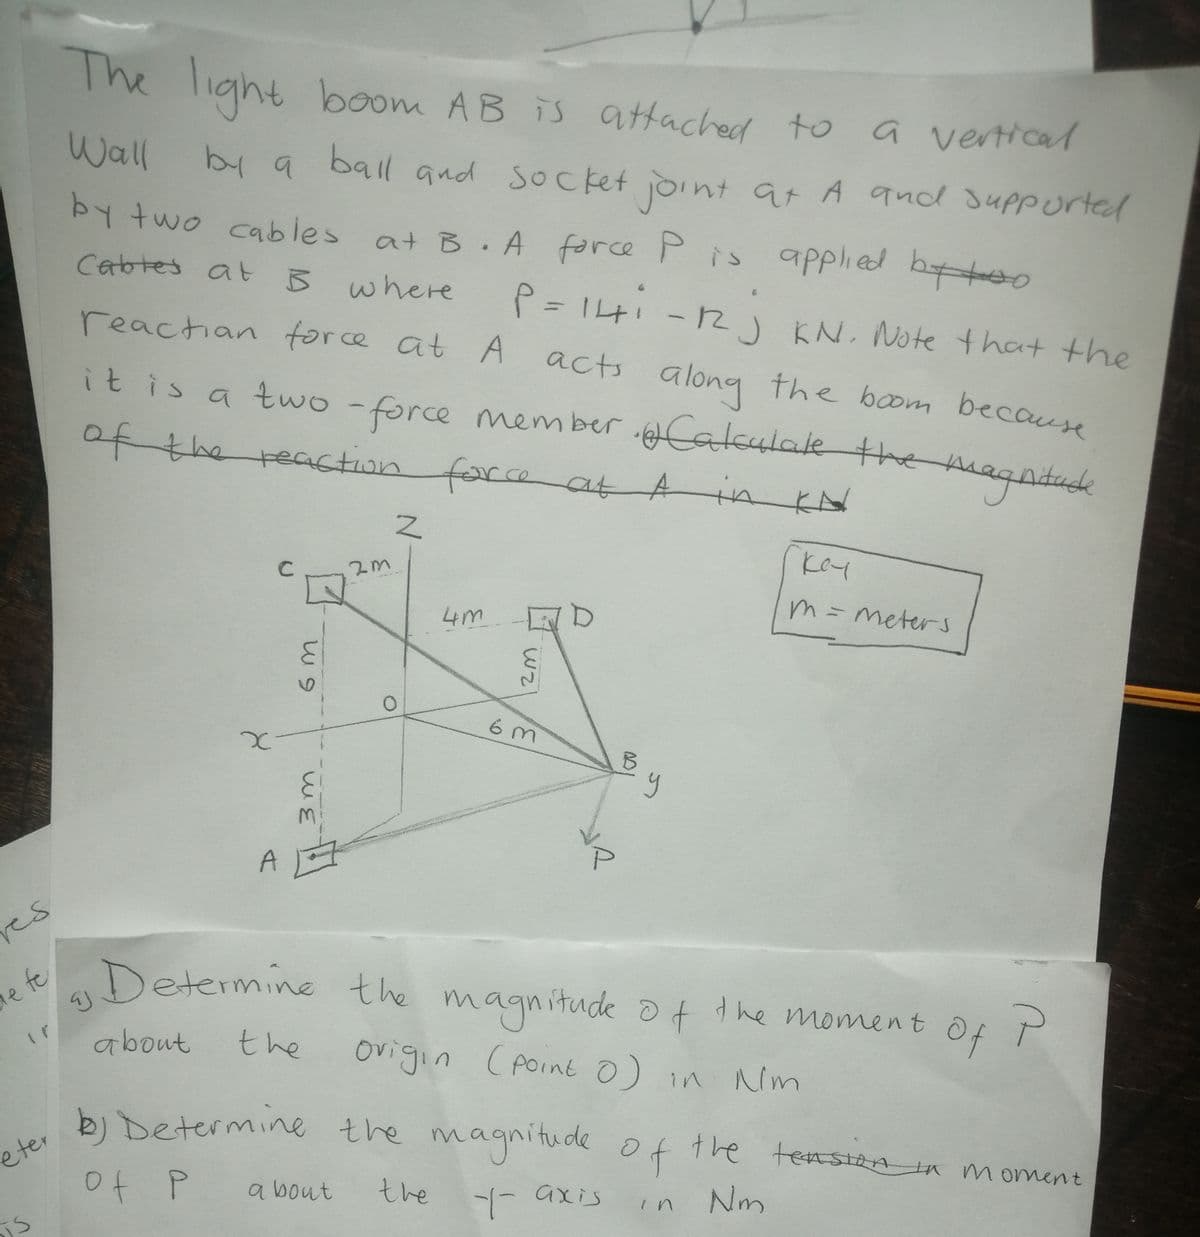 The
e light boom AB iS attached to
a vertical
Socket joint at A qnd suppurted
Wall
by a ball and
by two cables at B.A
force Pis apPplied btoo
Cabtes at B where
P= I4i -2) KN. Note that the
reactian force at A acts along the boom because
it is a two - agntudh
force member Calculale the m
of the reaction fore
farce
at Ain
KN
key
4m
m= meters
6o
es
Determine the magnitude ot the moment
le fe
about
the
ovigin (Point 0) in Nim
of
eter
bi Determine the magnitude o
f the tensiza in moment
a bout
the - axis
in Nm
m
